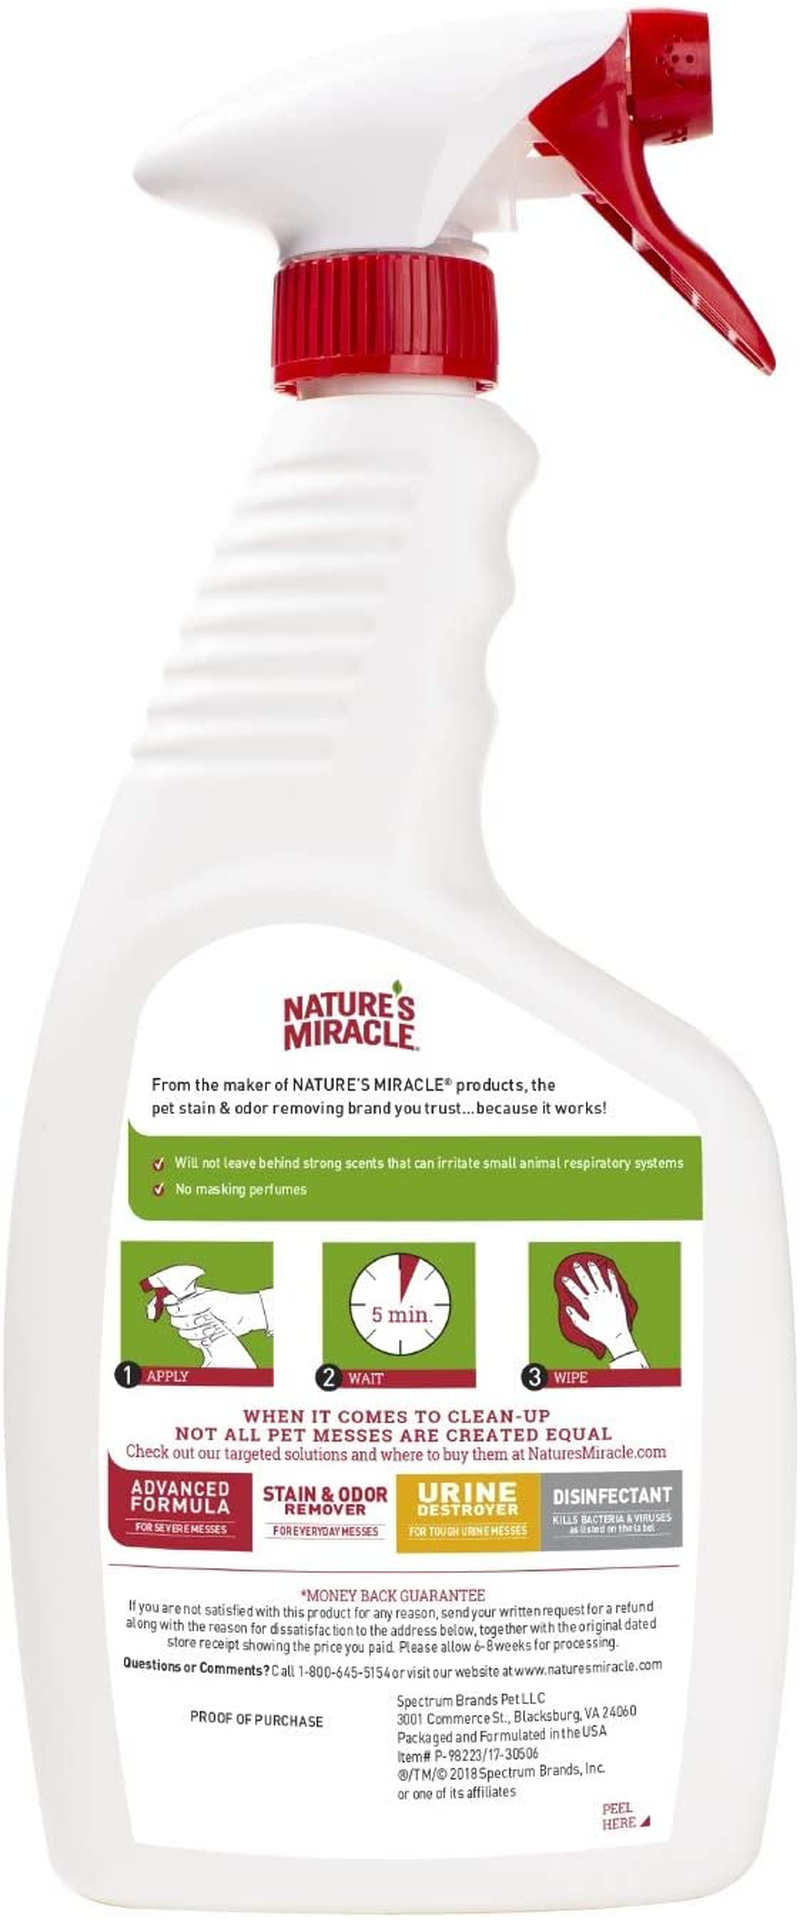 Nature’S Miracle Cage Cleaner 24 Fl Oz, Small Animal Formula, Cleans and Deodorizes Small Animal Cages, 2Nd Edition Animals & Pet Supplies > Pet Supplies > Small Animal Supplies > Small Animal Bedding Nature's Miracle   